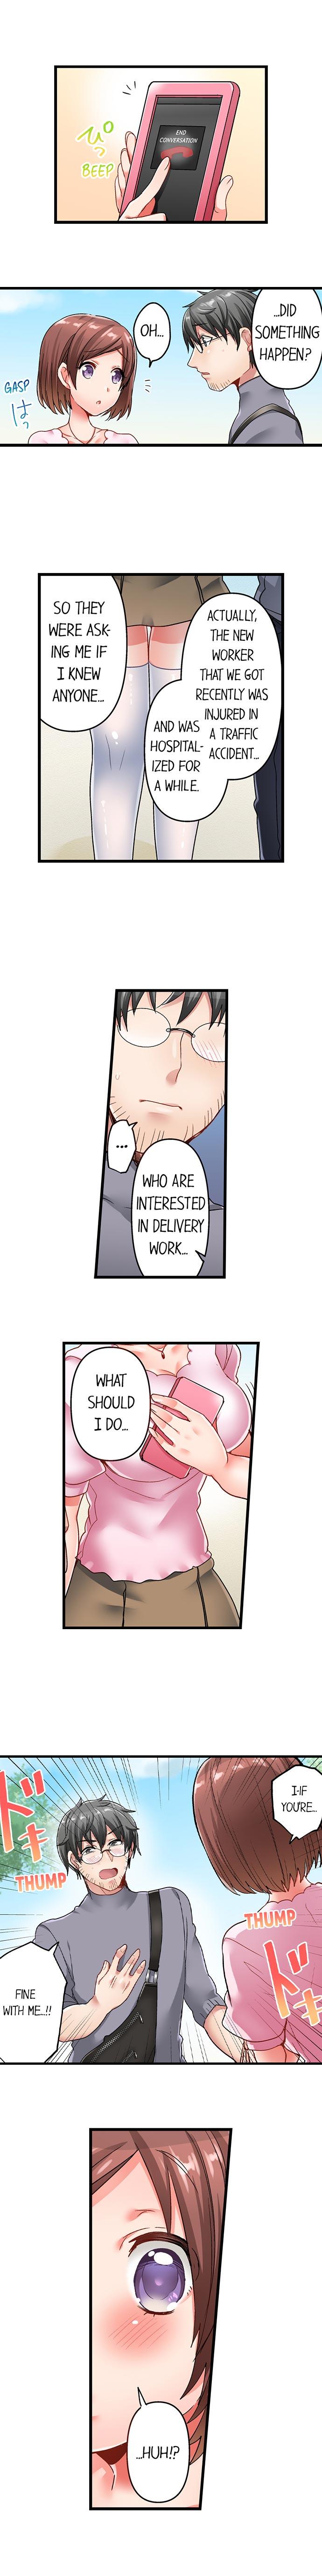 5-Second Sex Delivery 80